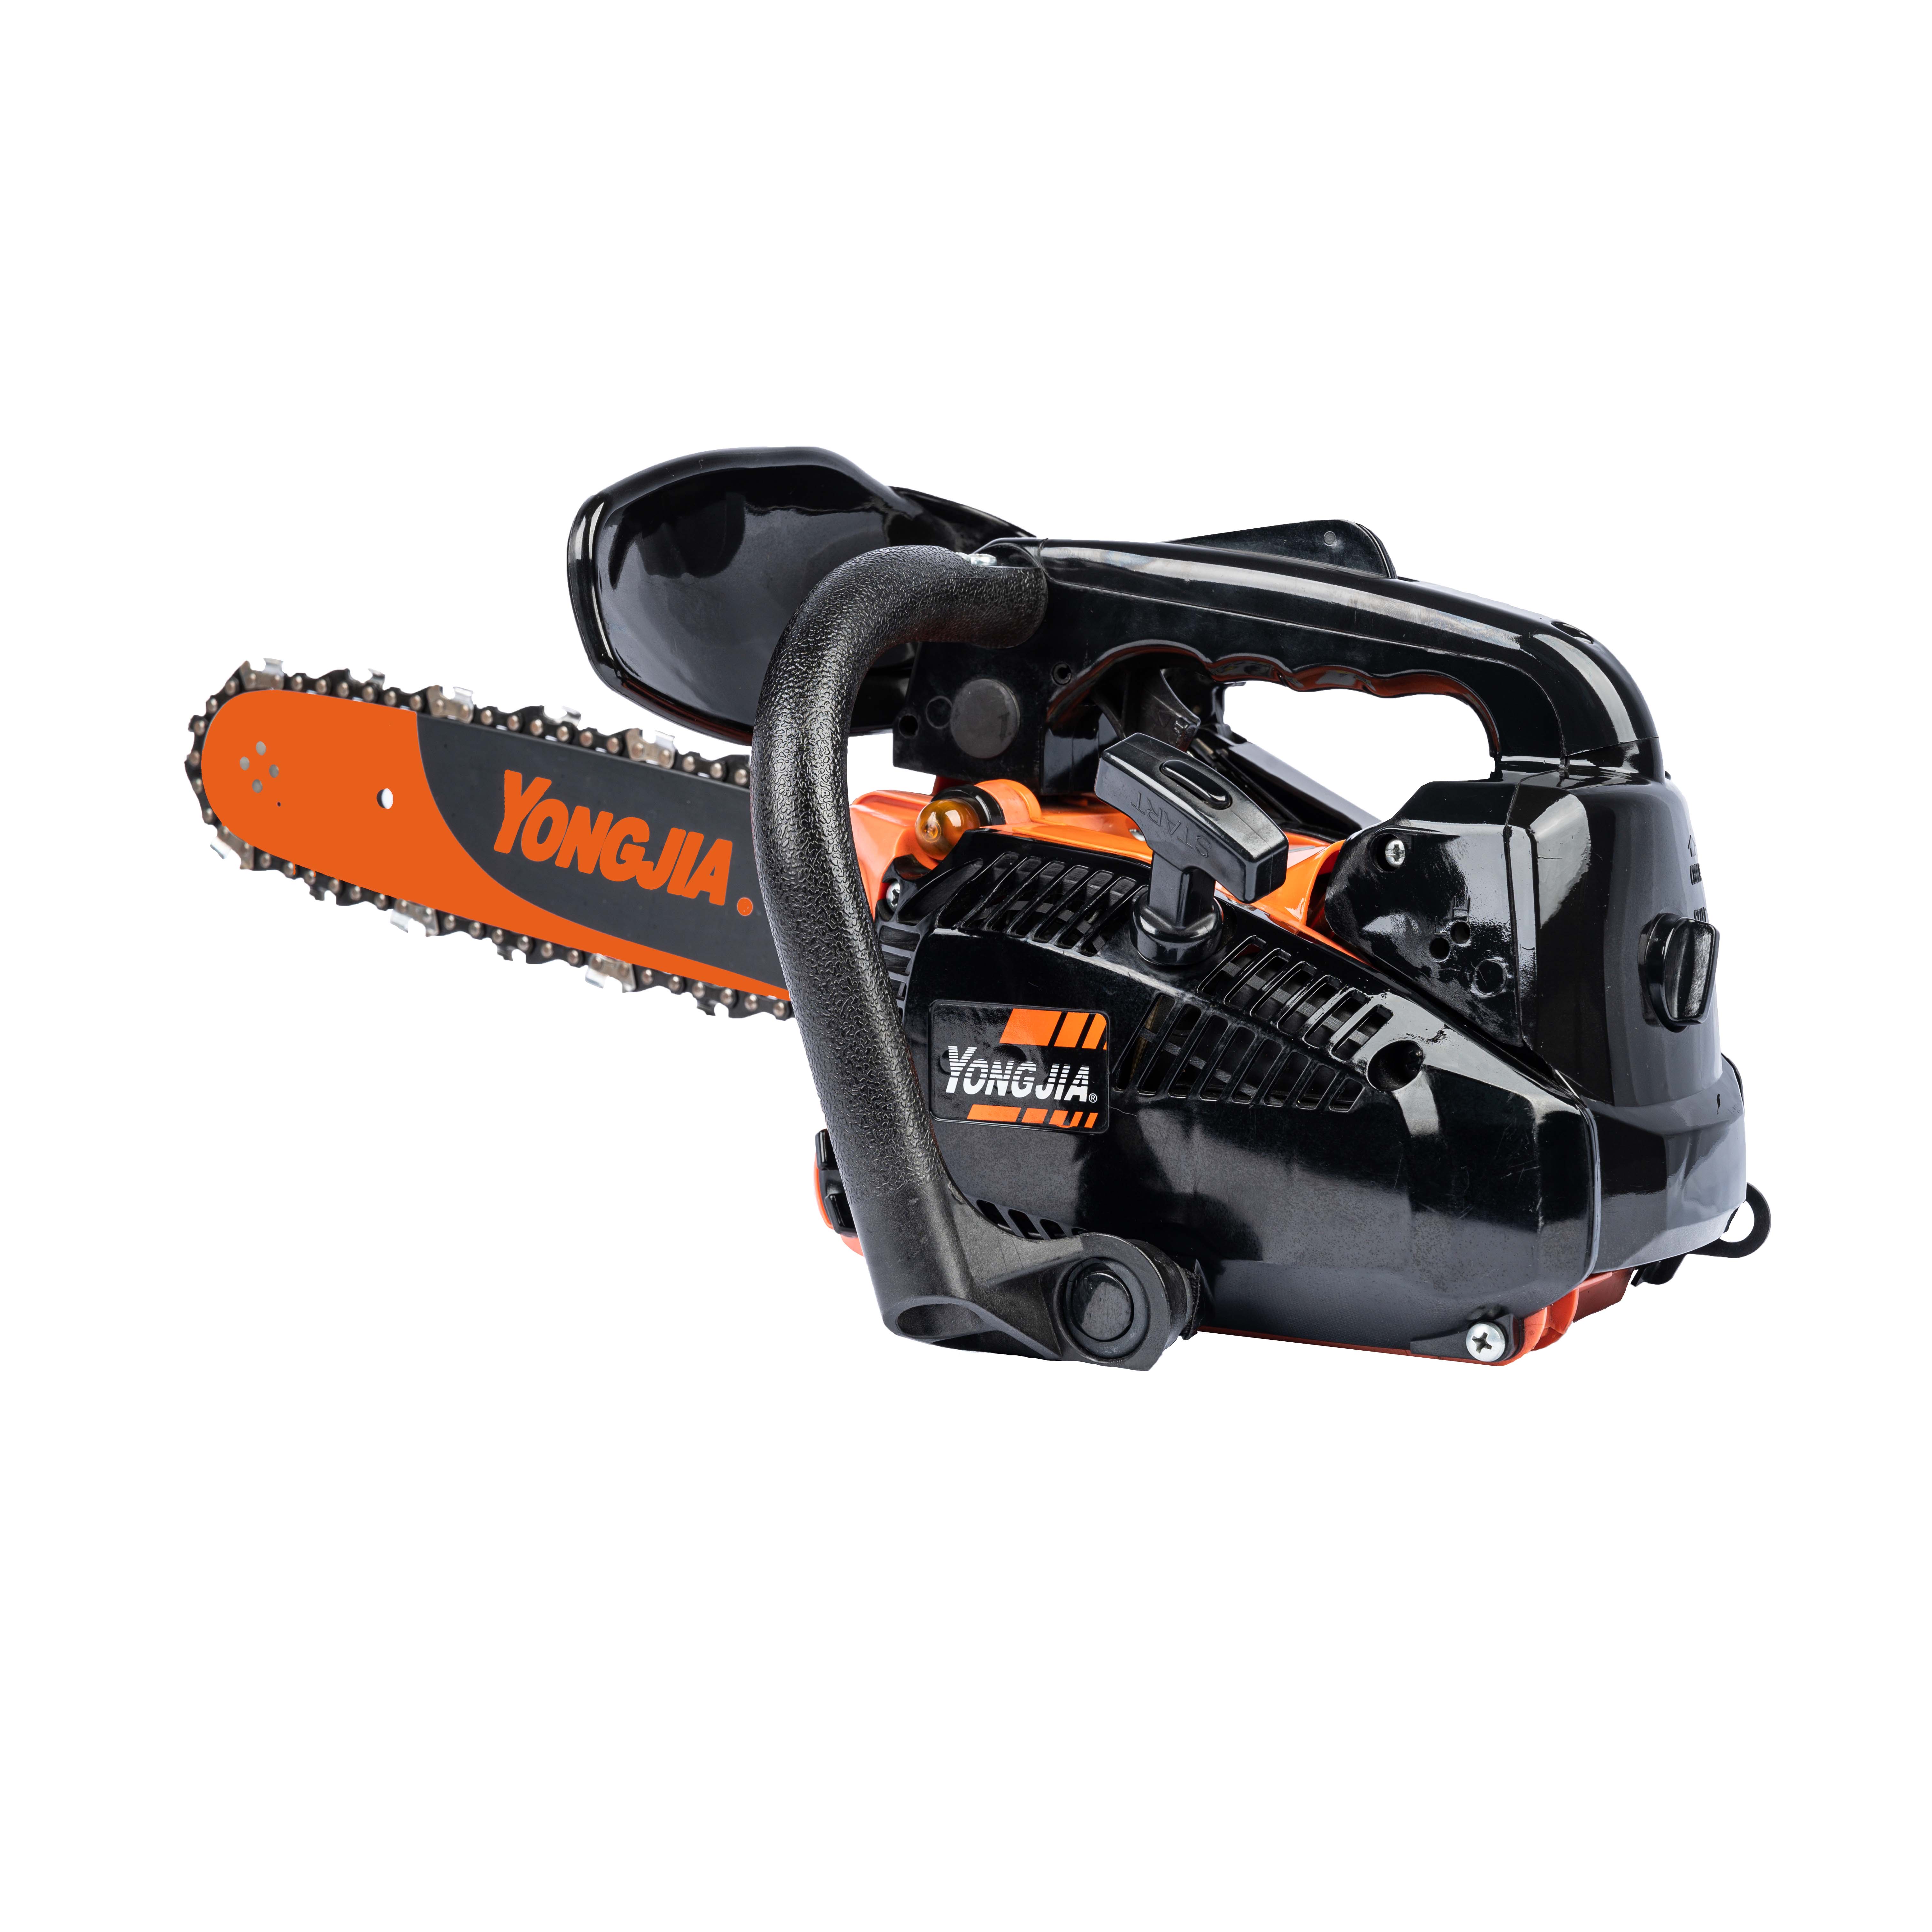 EURO-V engine 25cc handle mini chainsaw 2500 MODEL YD-25 Featured Image